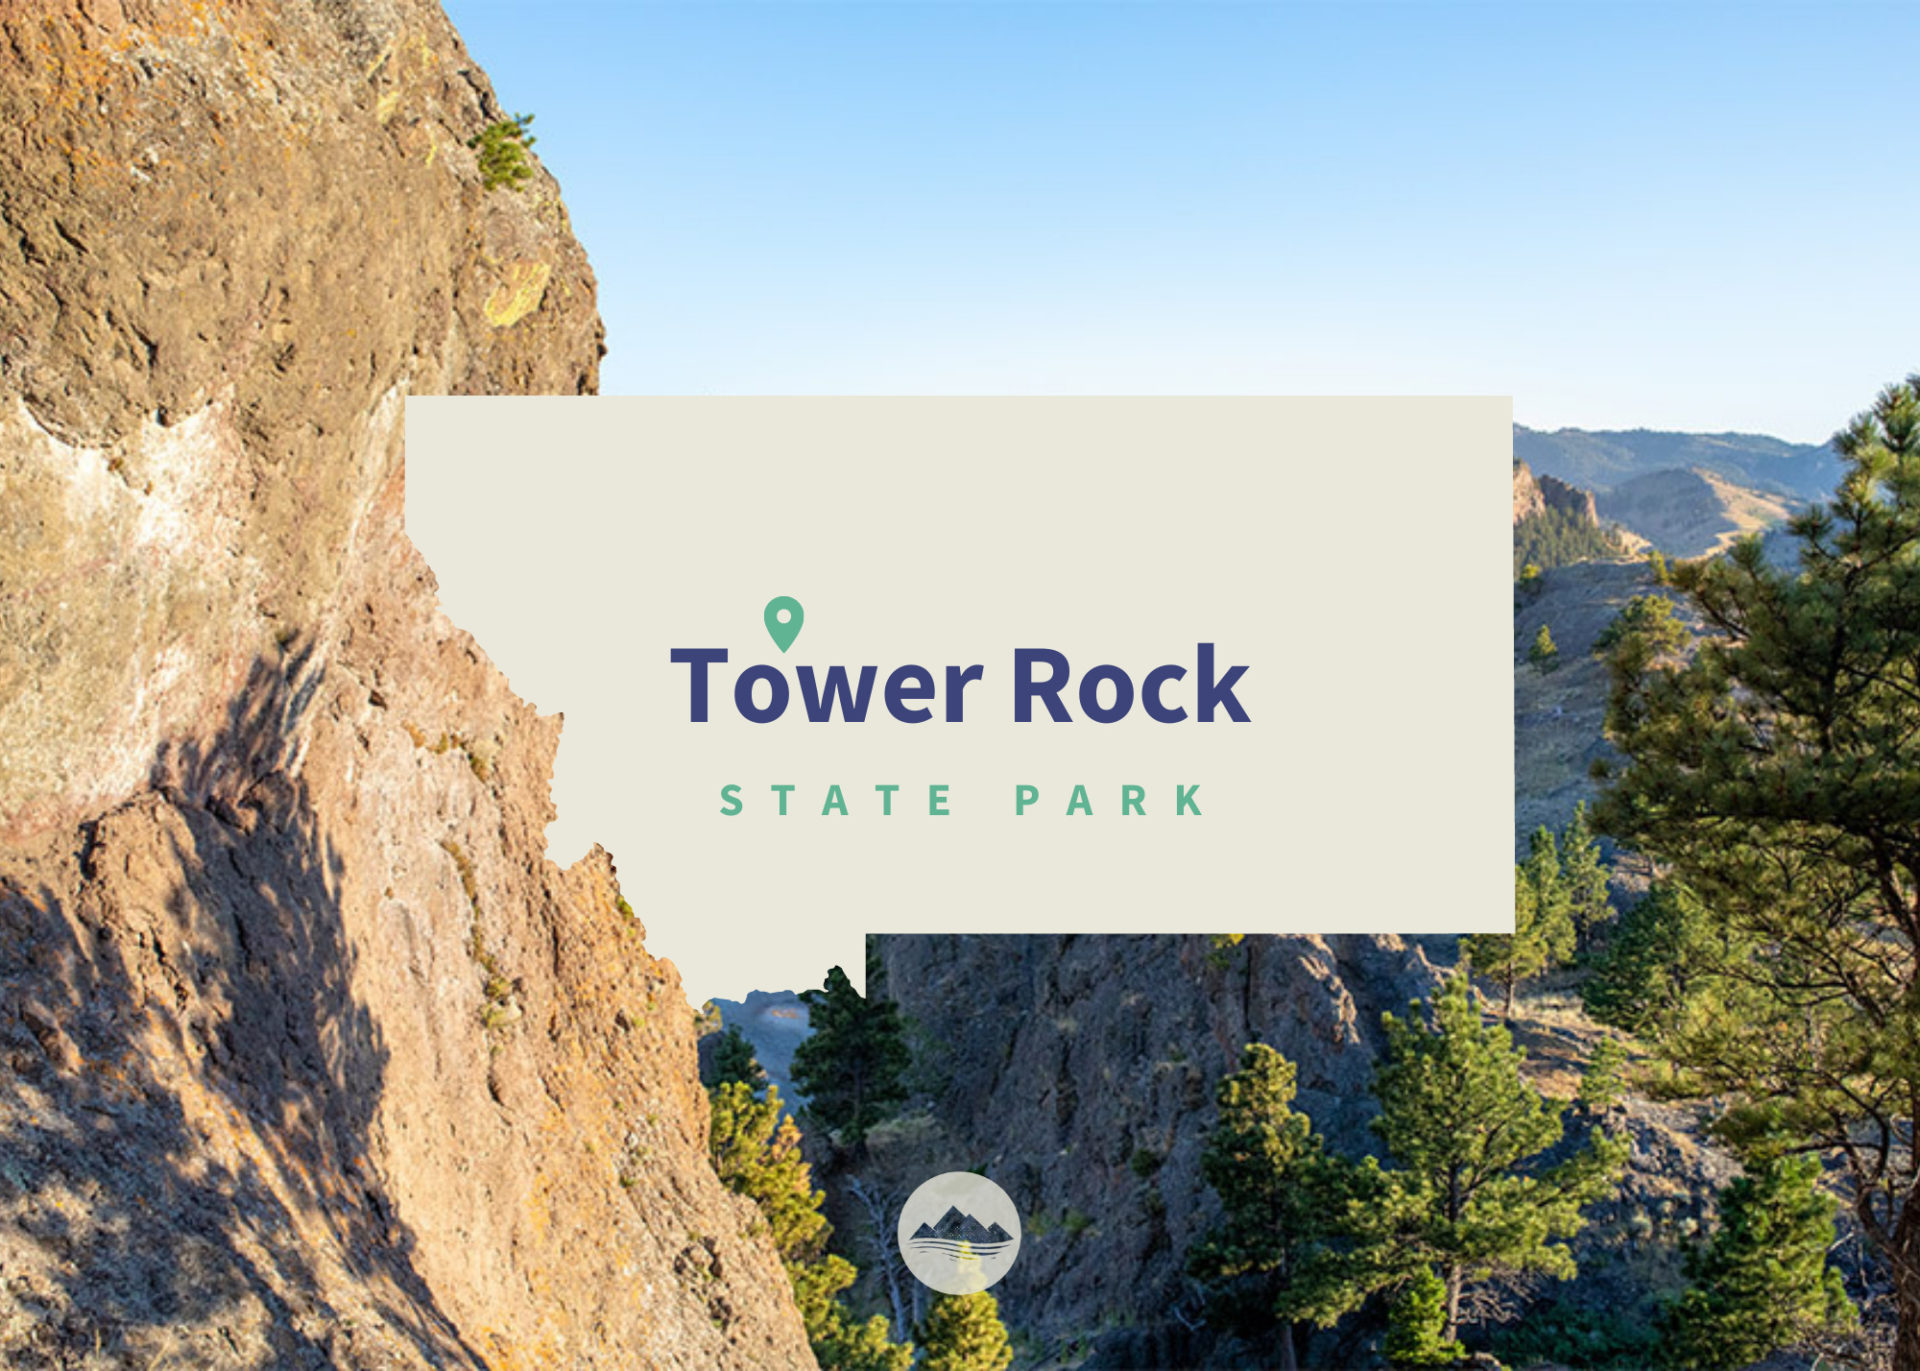 Tower Rock State Park